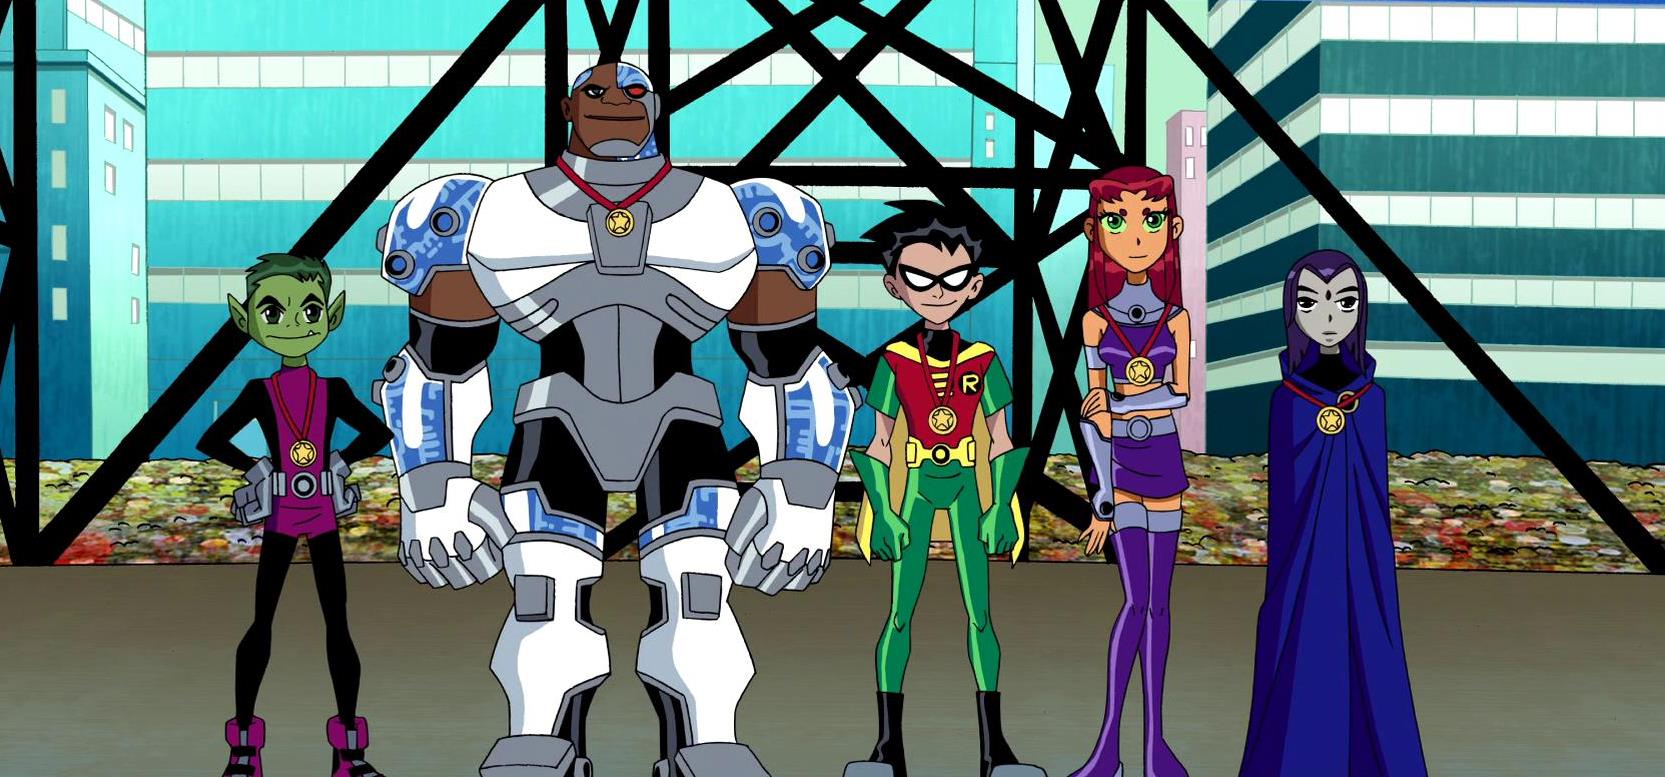 Beast Boy, Cyborg, Robin, Starfire and Raven in Teen Titans: Trouble in Tokyo (2006)